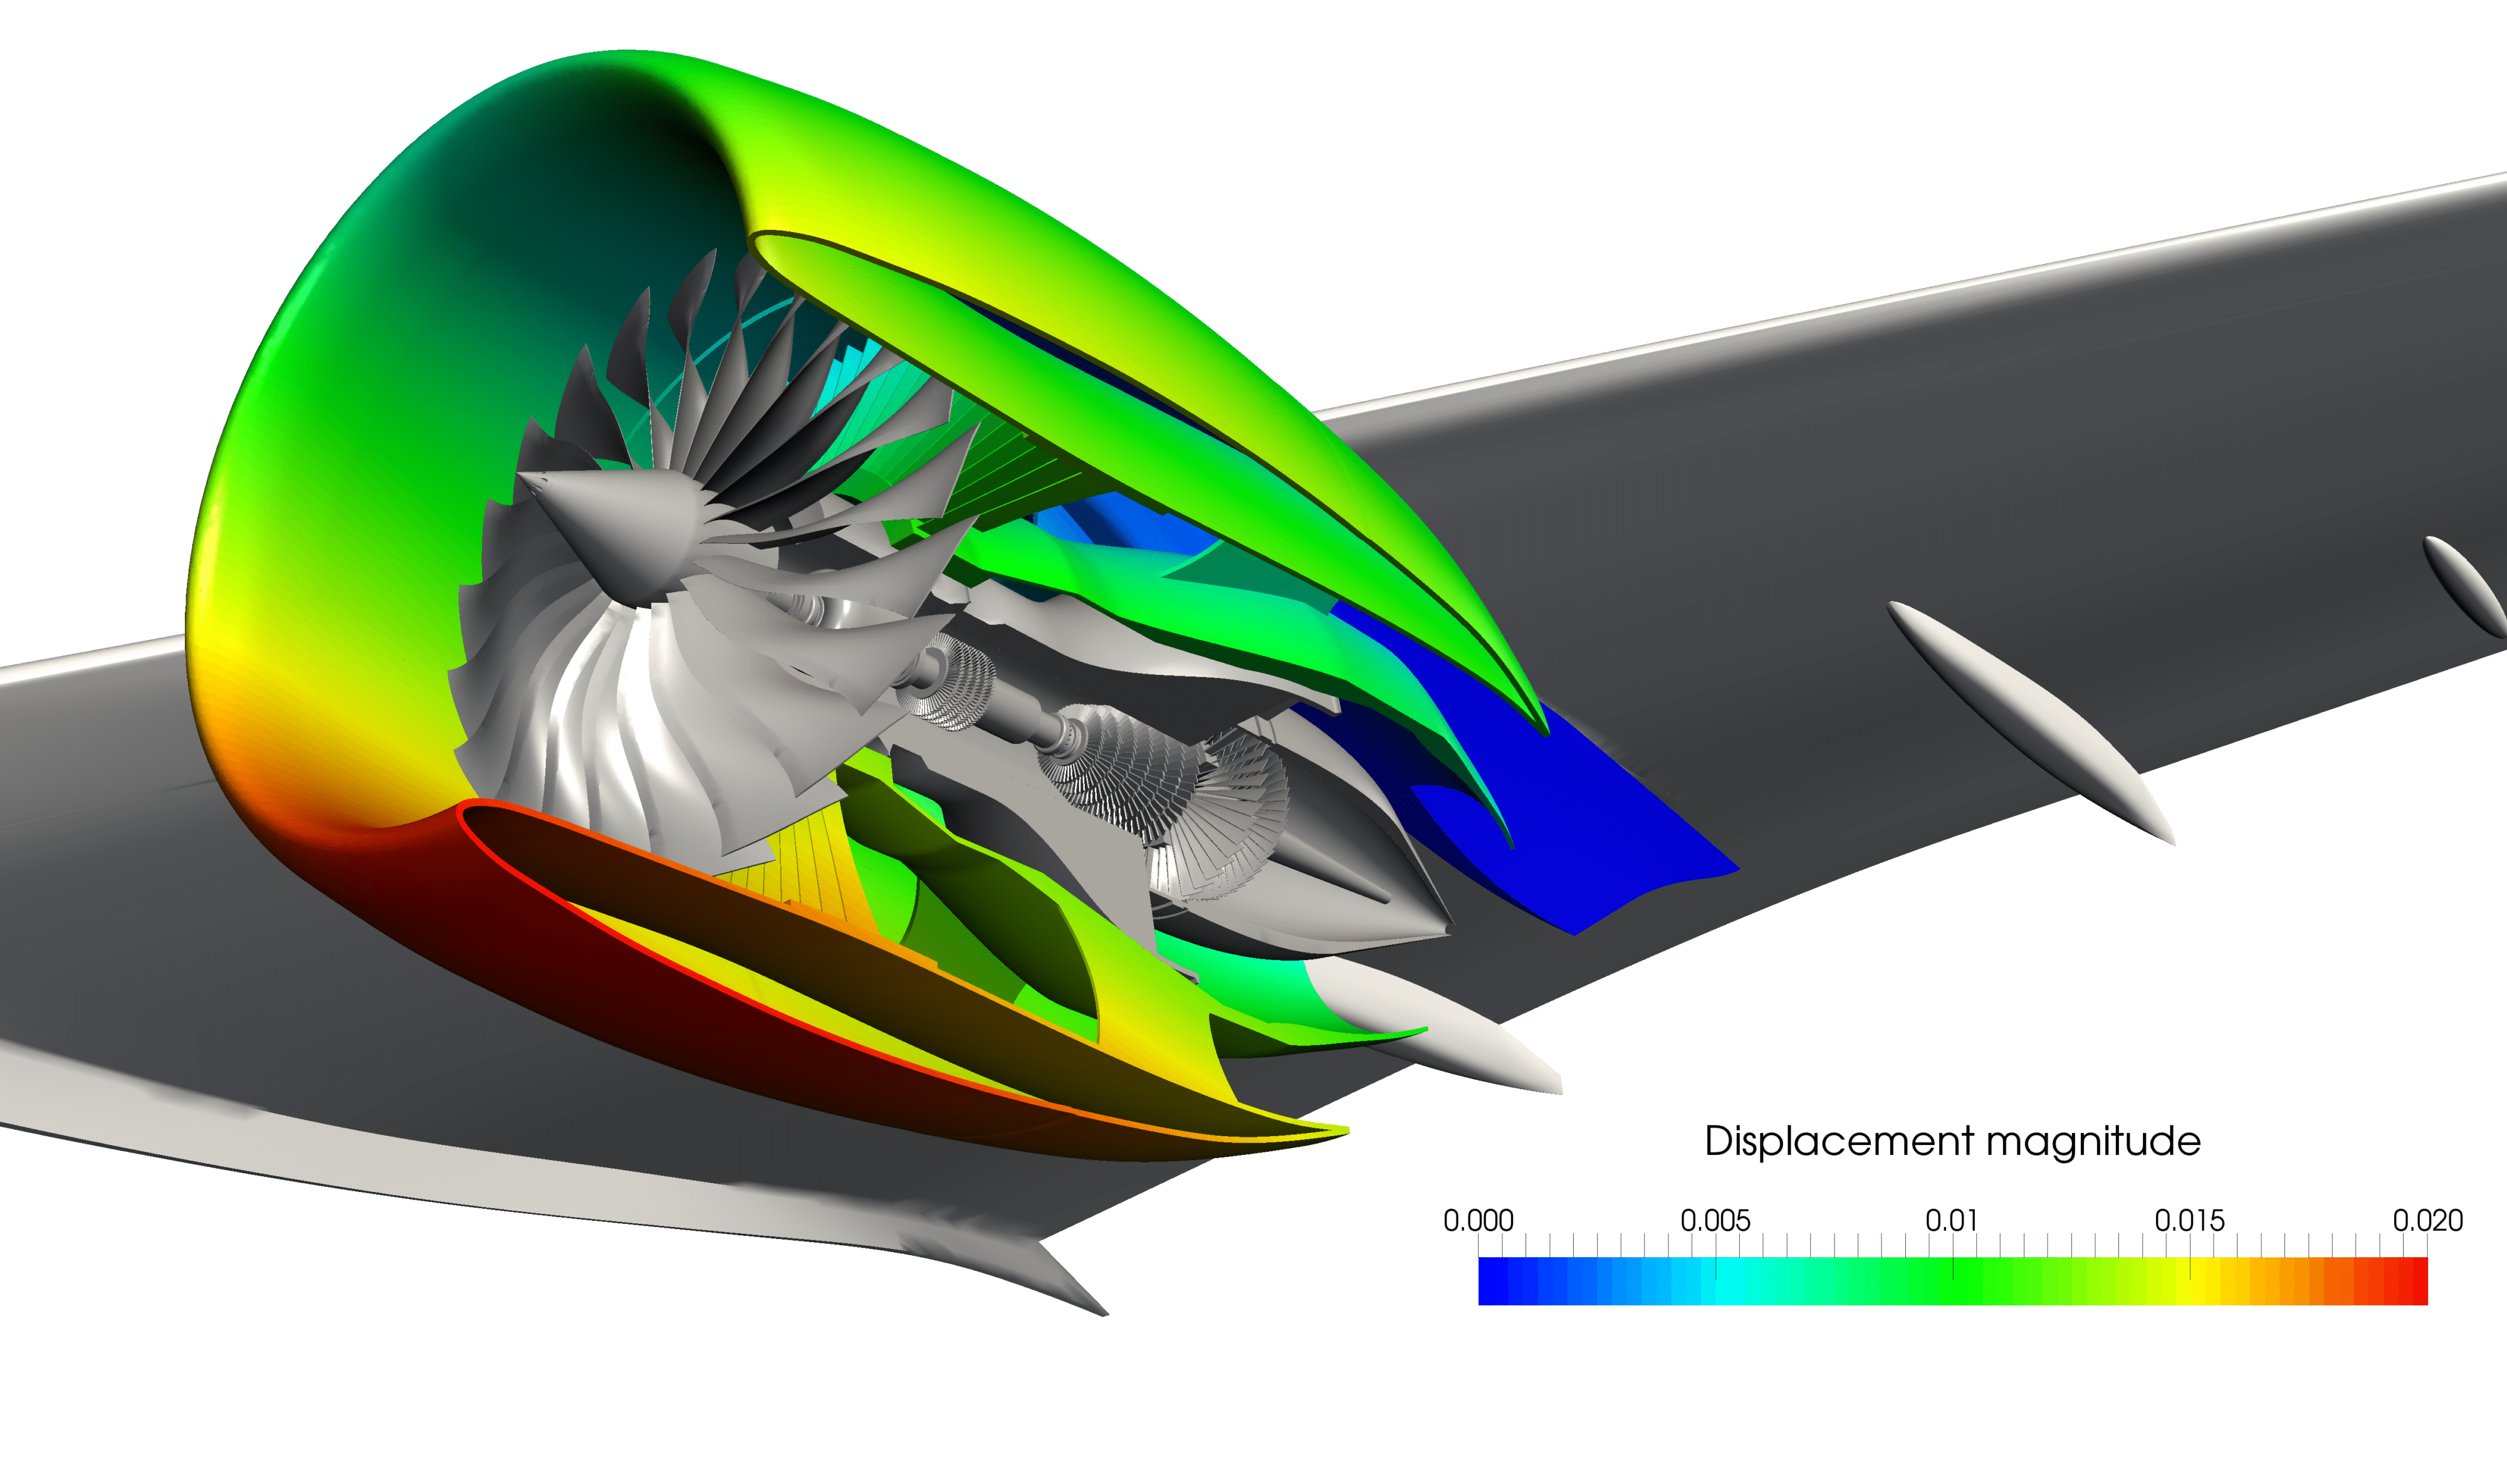 FEA-finite-element-method-subscale-jet-engine-computer-aided-test-Simulation-SimuTech-Group